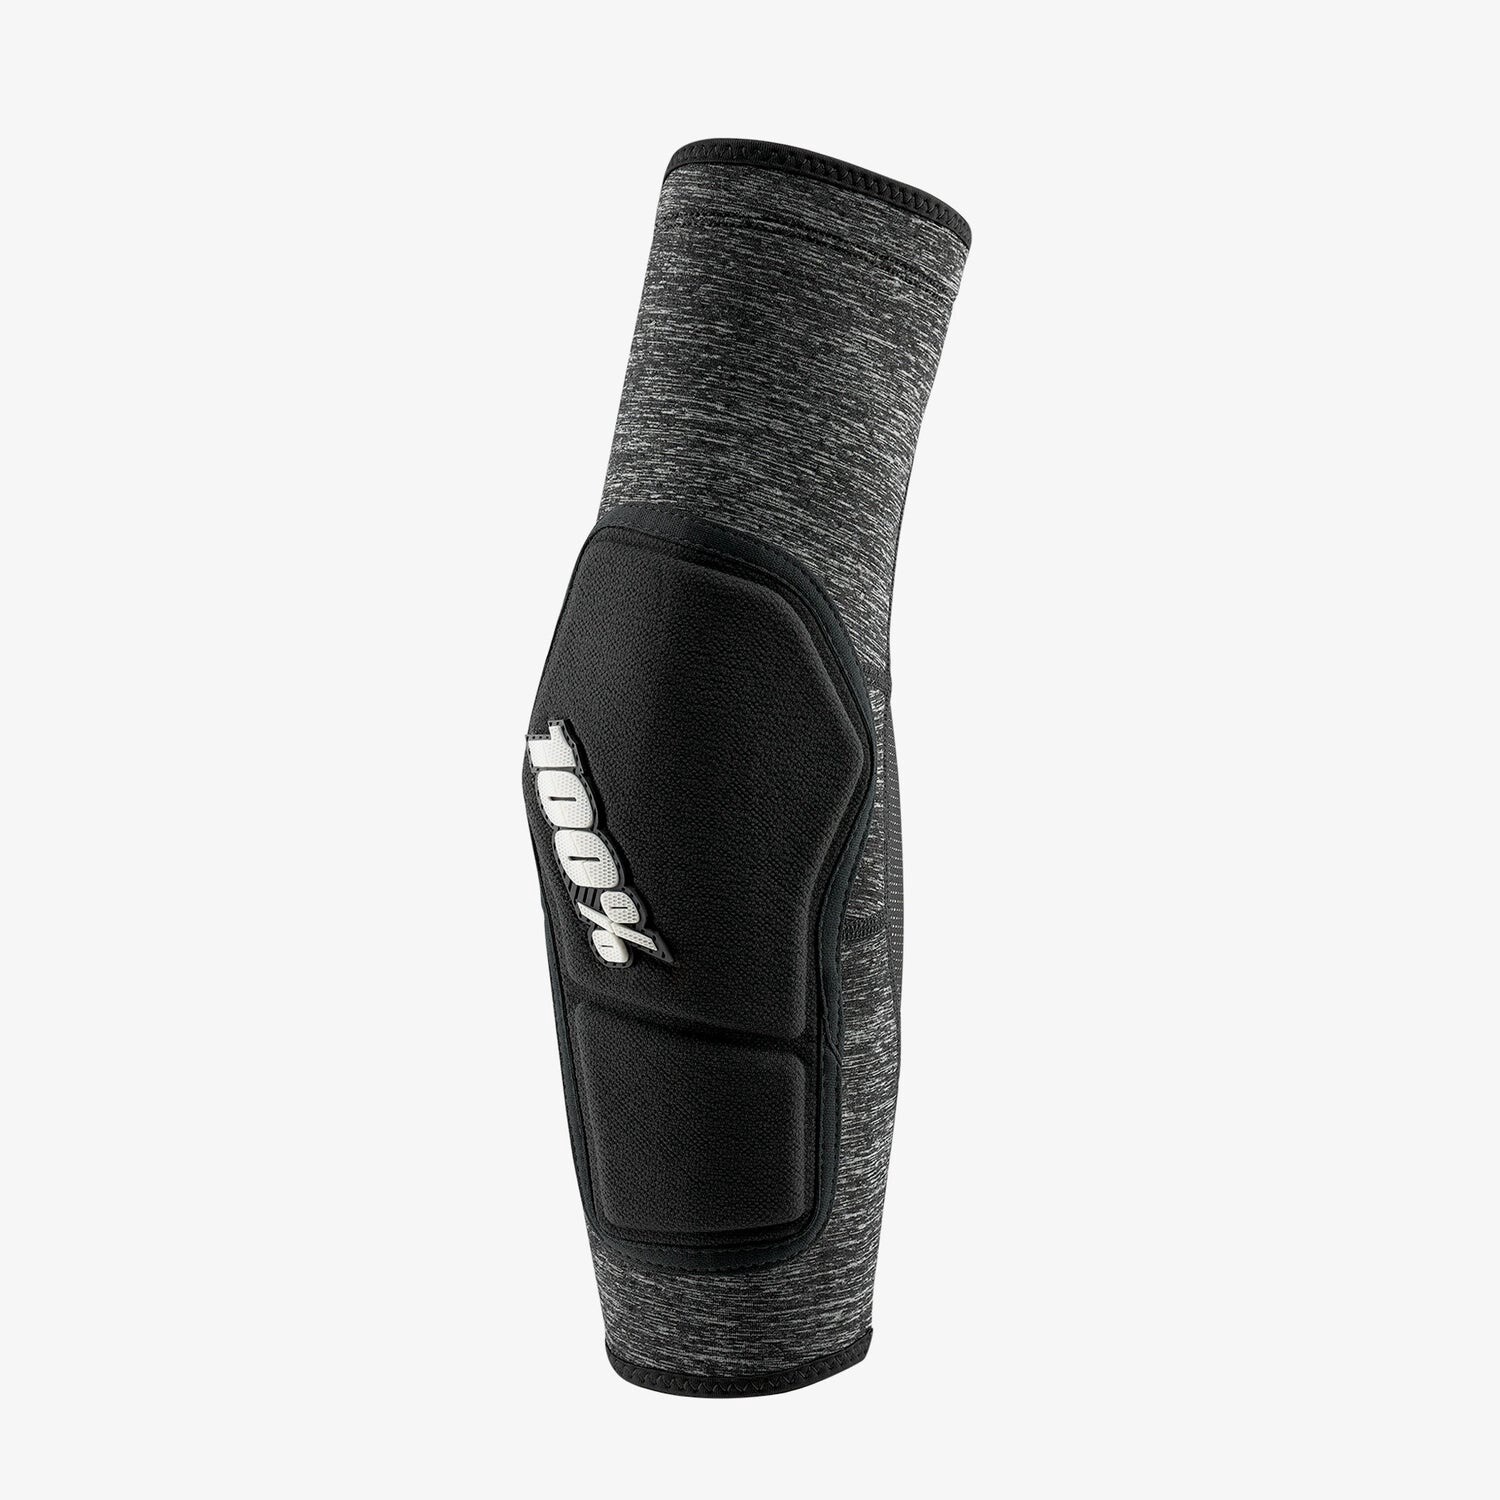 100% RIDECAMP Elbow Guard